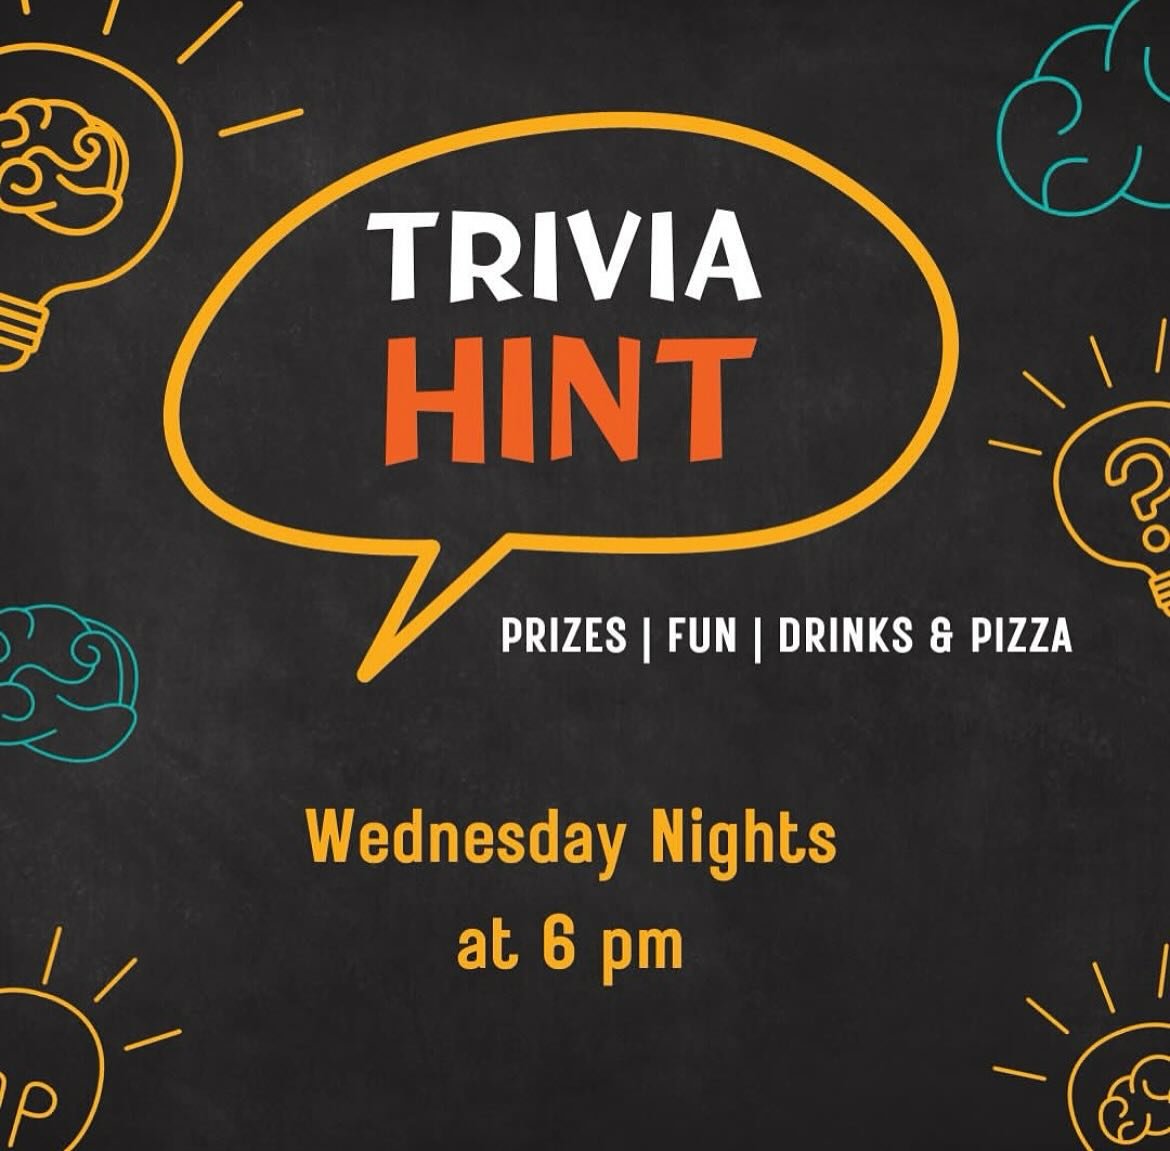 It's time for Wednesday Night Trivia!  Join us at 6 pm with your team of up to 6 to compete for prizes. 

HINT - The answer to the question below, will be an answer to a different question on Wednesday&rsquo;s Trivia Night

AUTOMOBILES: Launched in 2